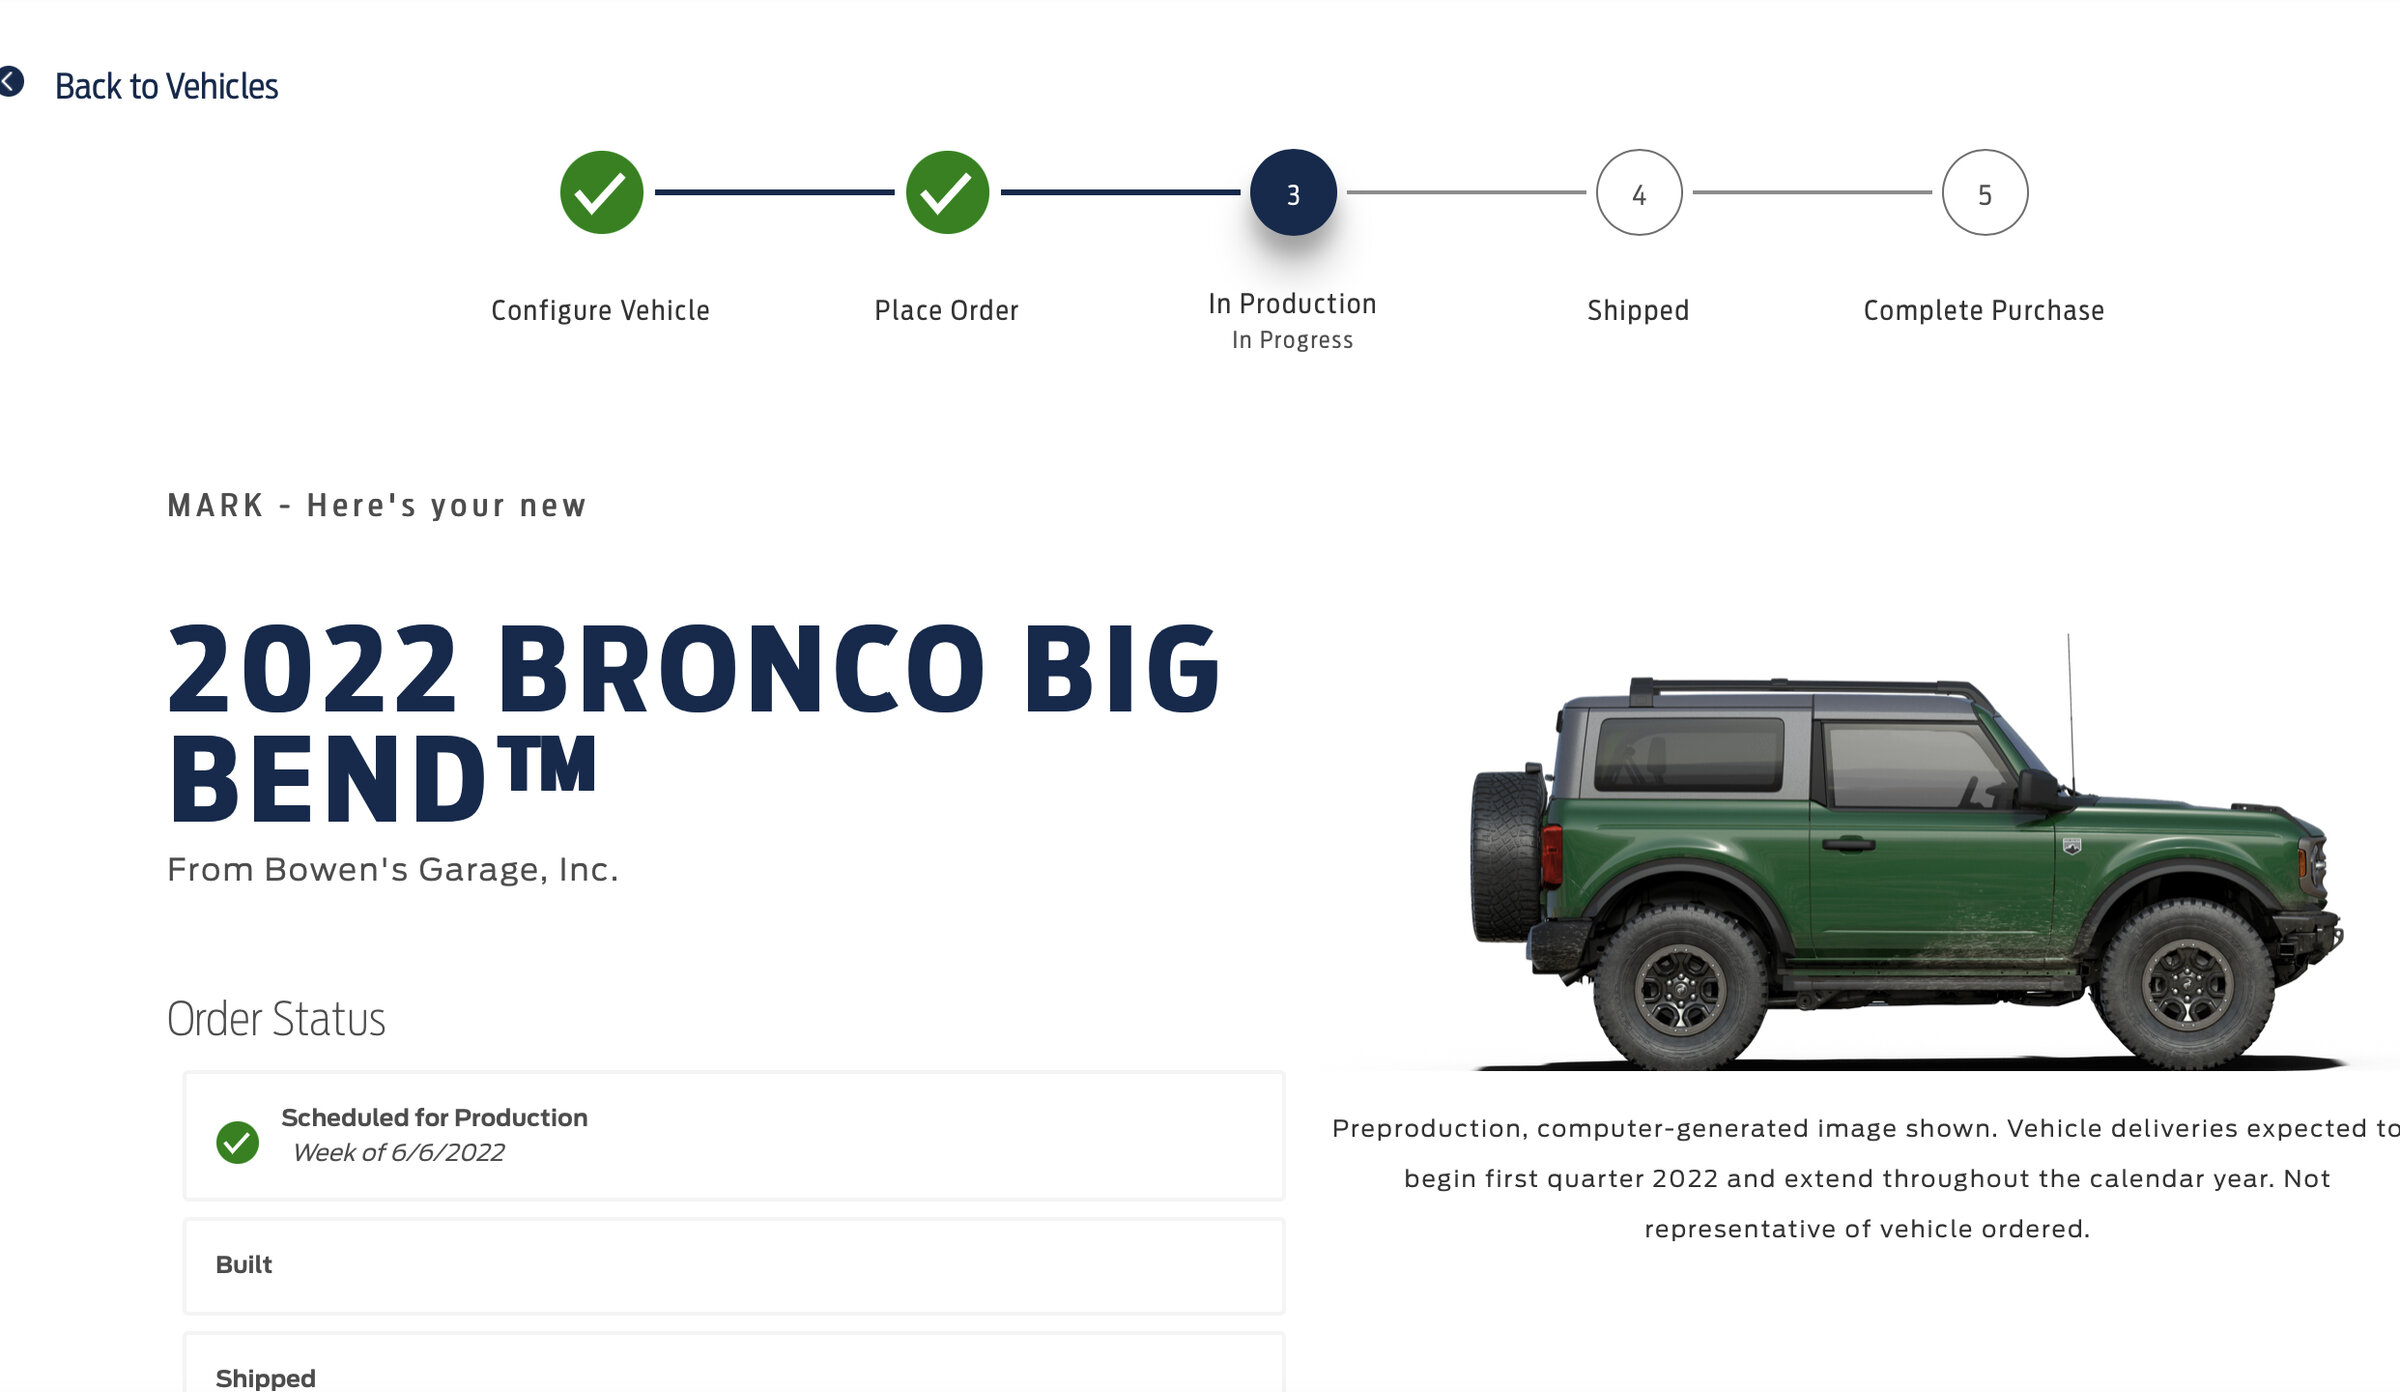 Ford Bronco ⏱ Bronco Scheduling Next Week (4/18) For Build Weeks 5/30-6/27 and 7/11-7/25 1DCAD295-F6C7-4888-BDBF-17C5FA42A9E3